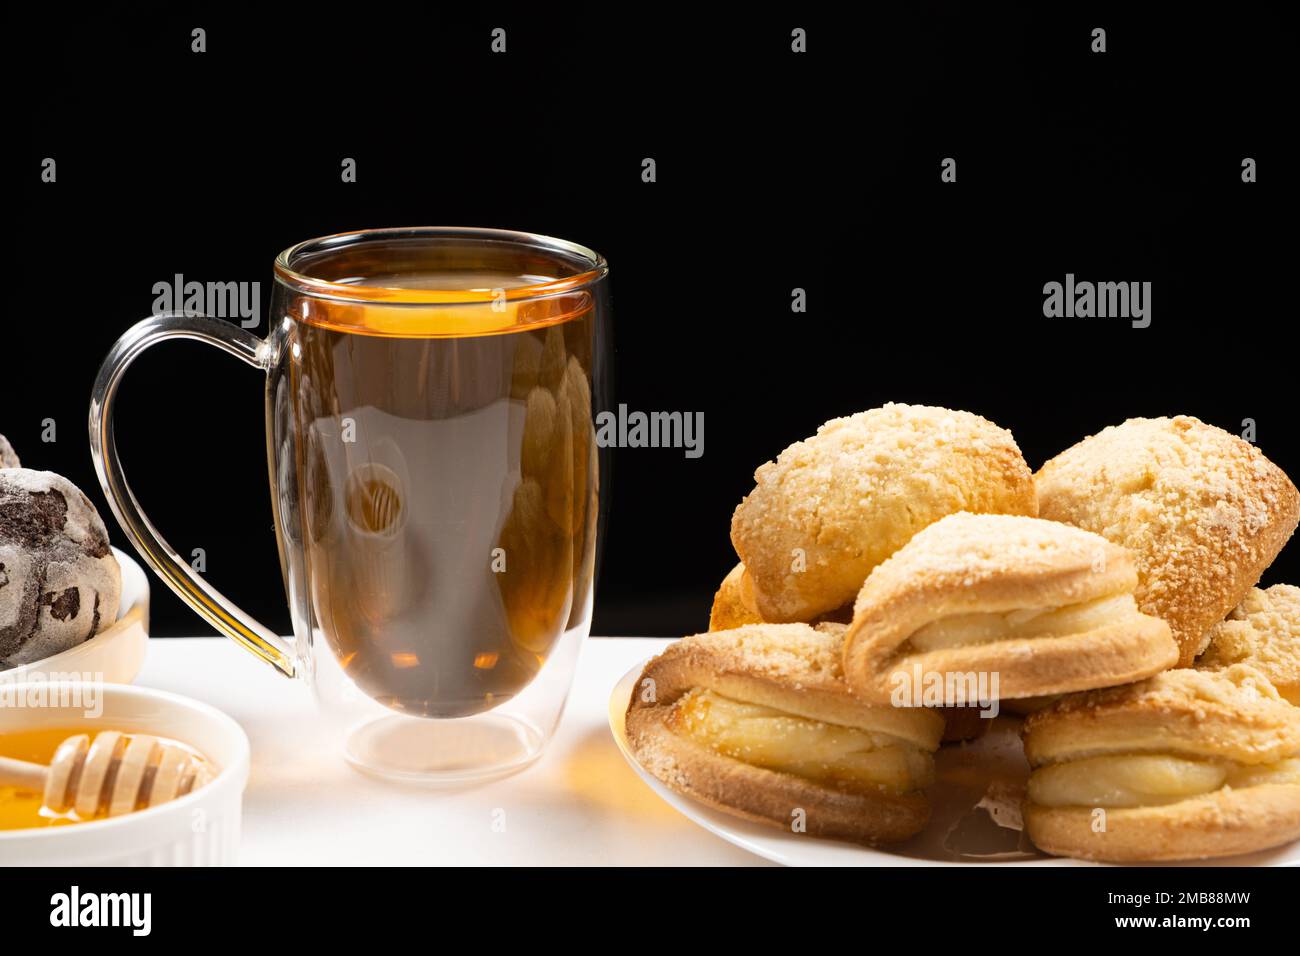 Tea with honey with cakes with creamy filling on a black background. Stock Photo